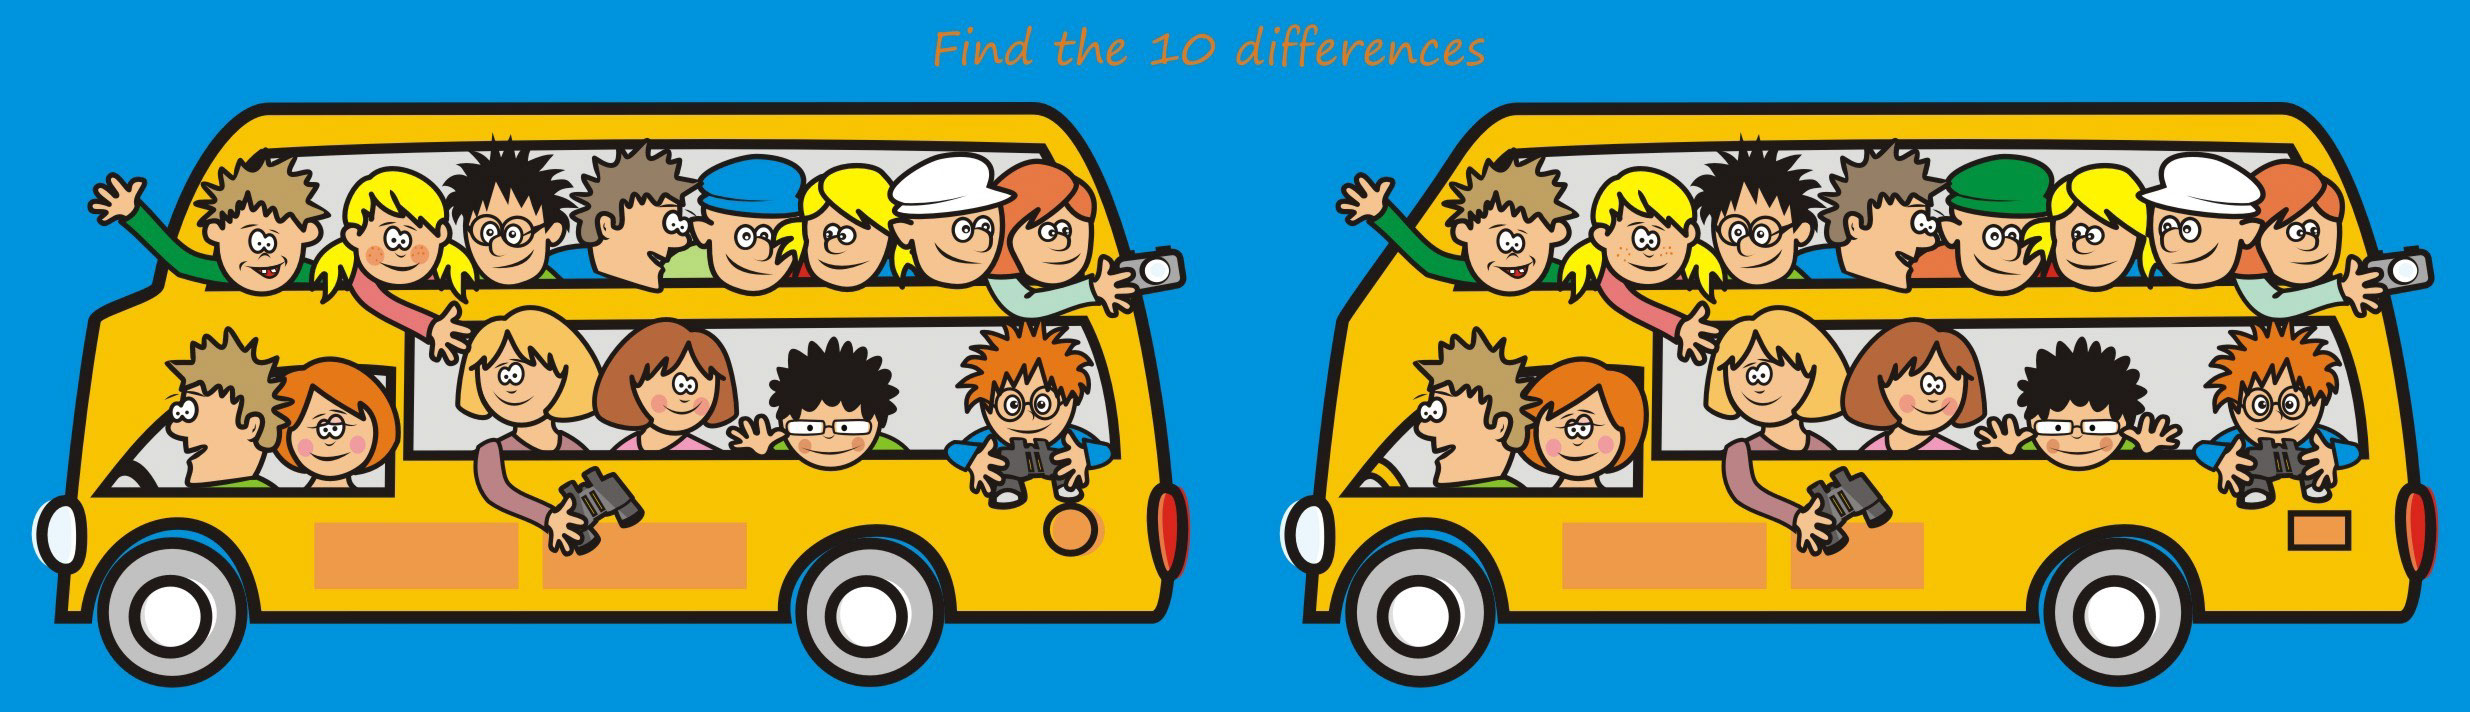 Can you find all ten differences between the two school buses?